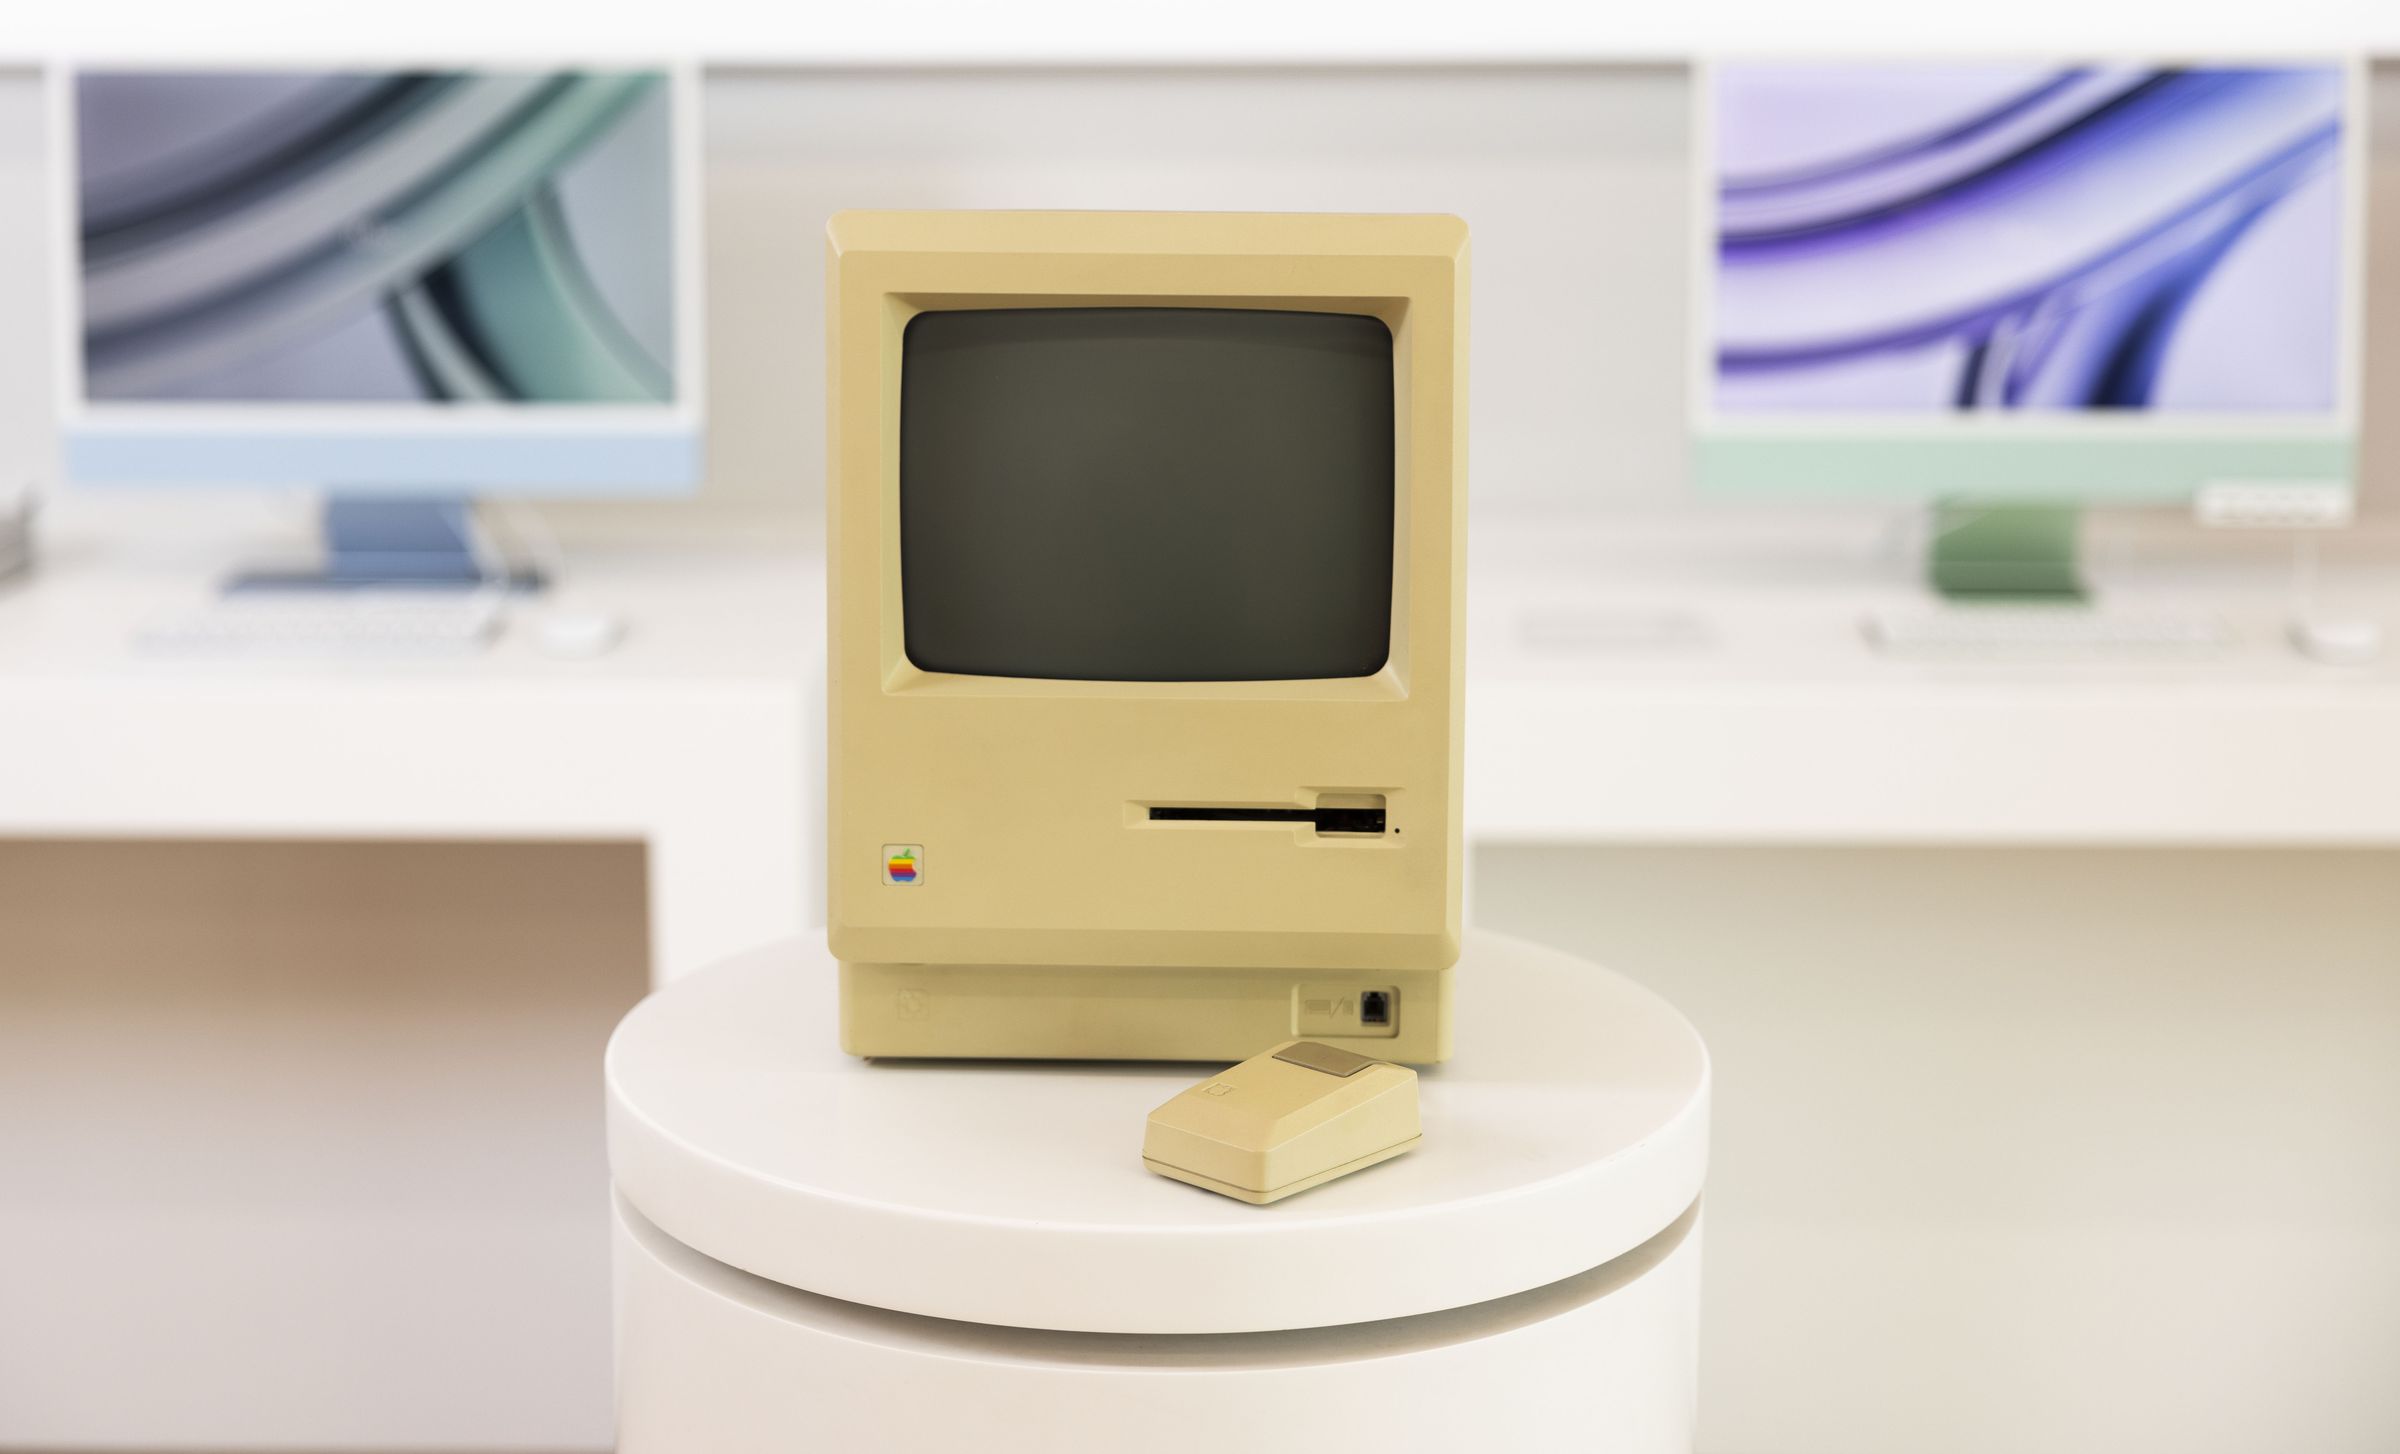 An original Macintosh sits on a pedestal in a brightly lit room with two Apple silicon iMacs behind it in blue and green.